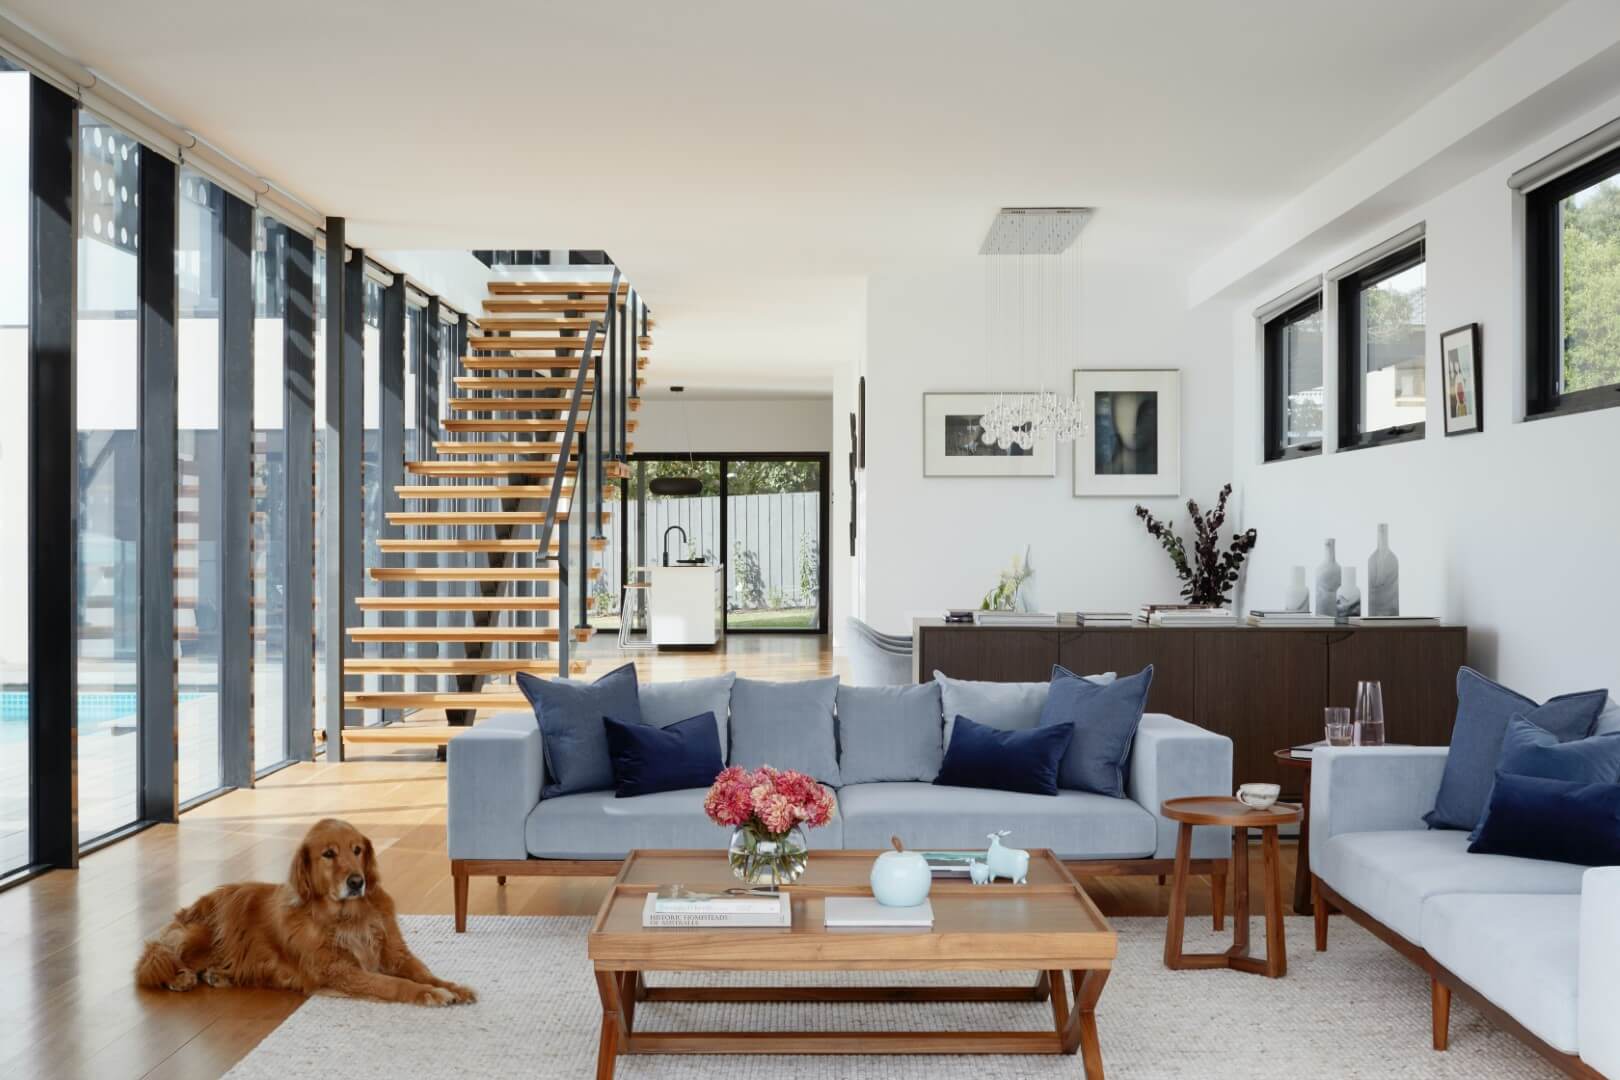 Big living room with huge windows, stairs and a dog